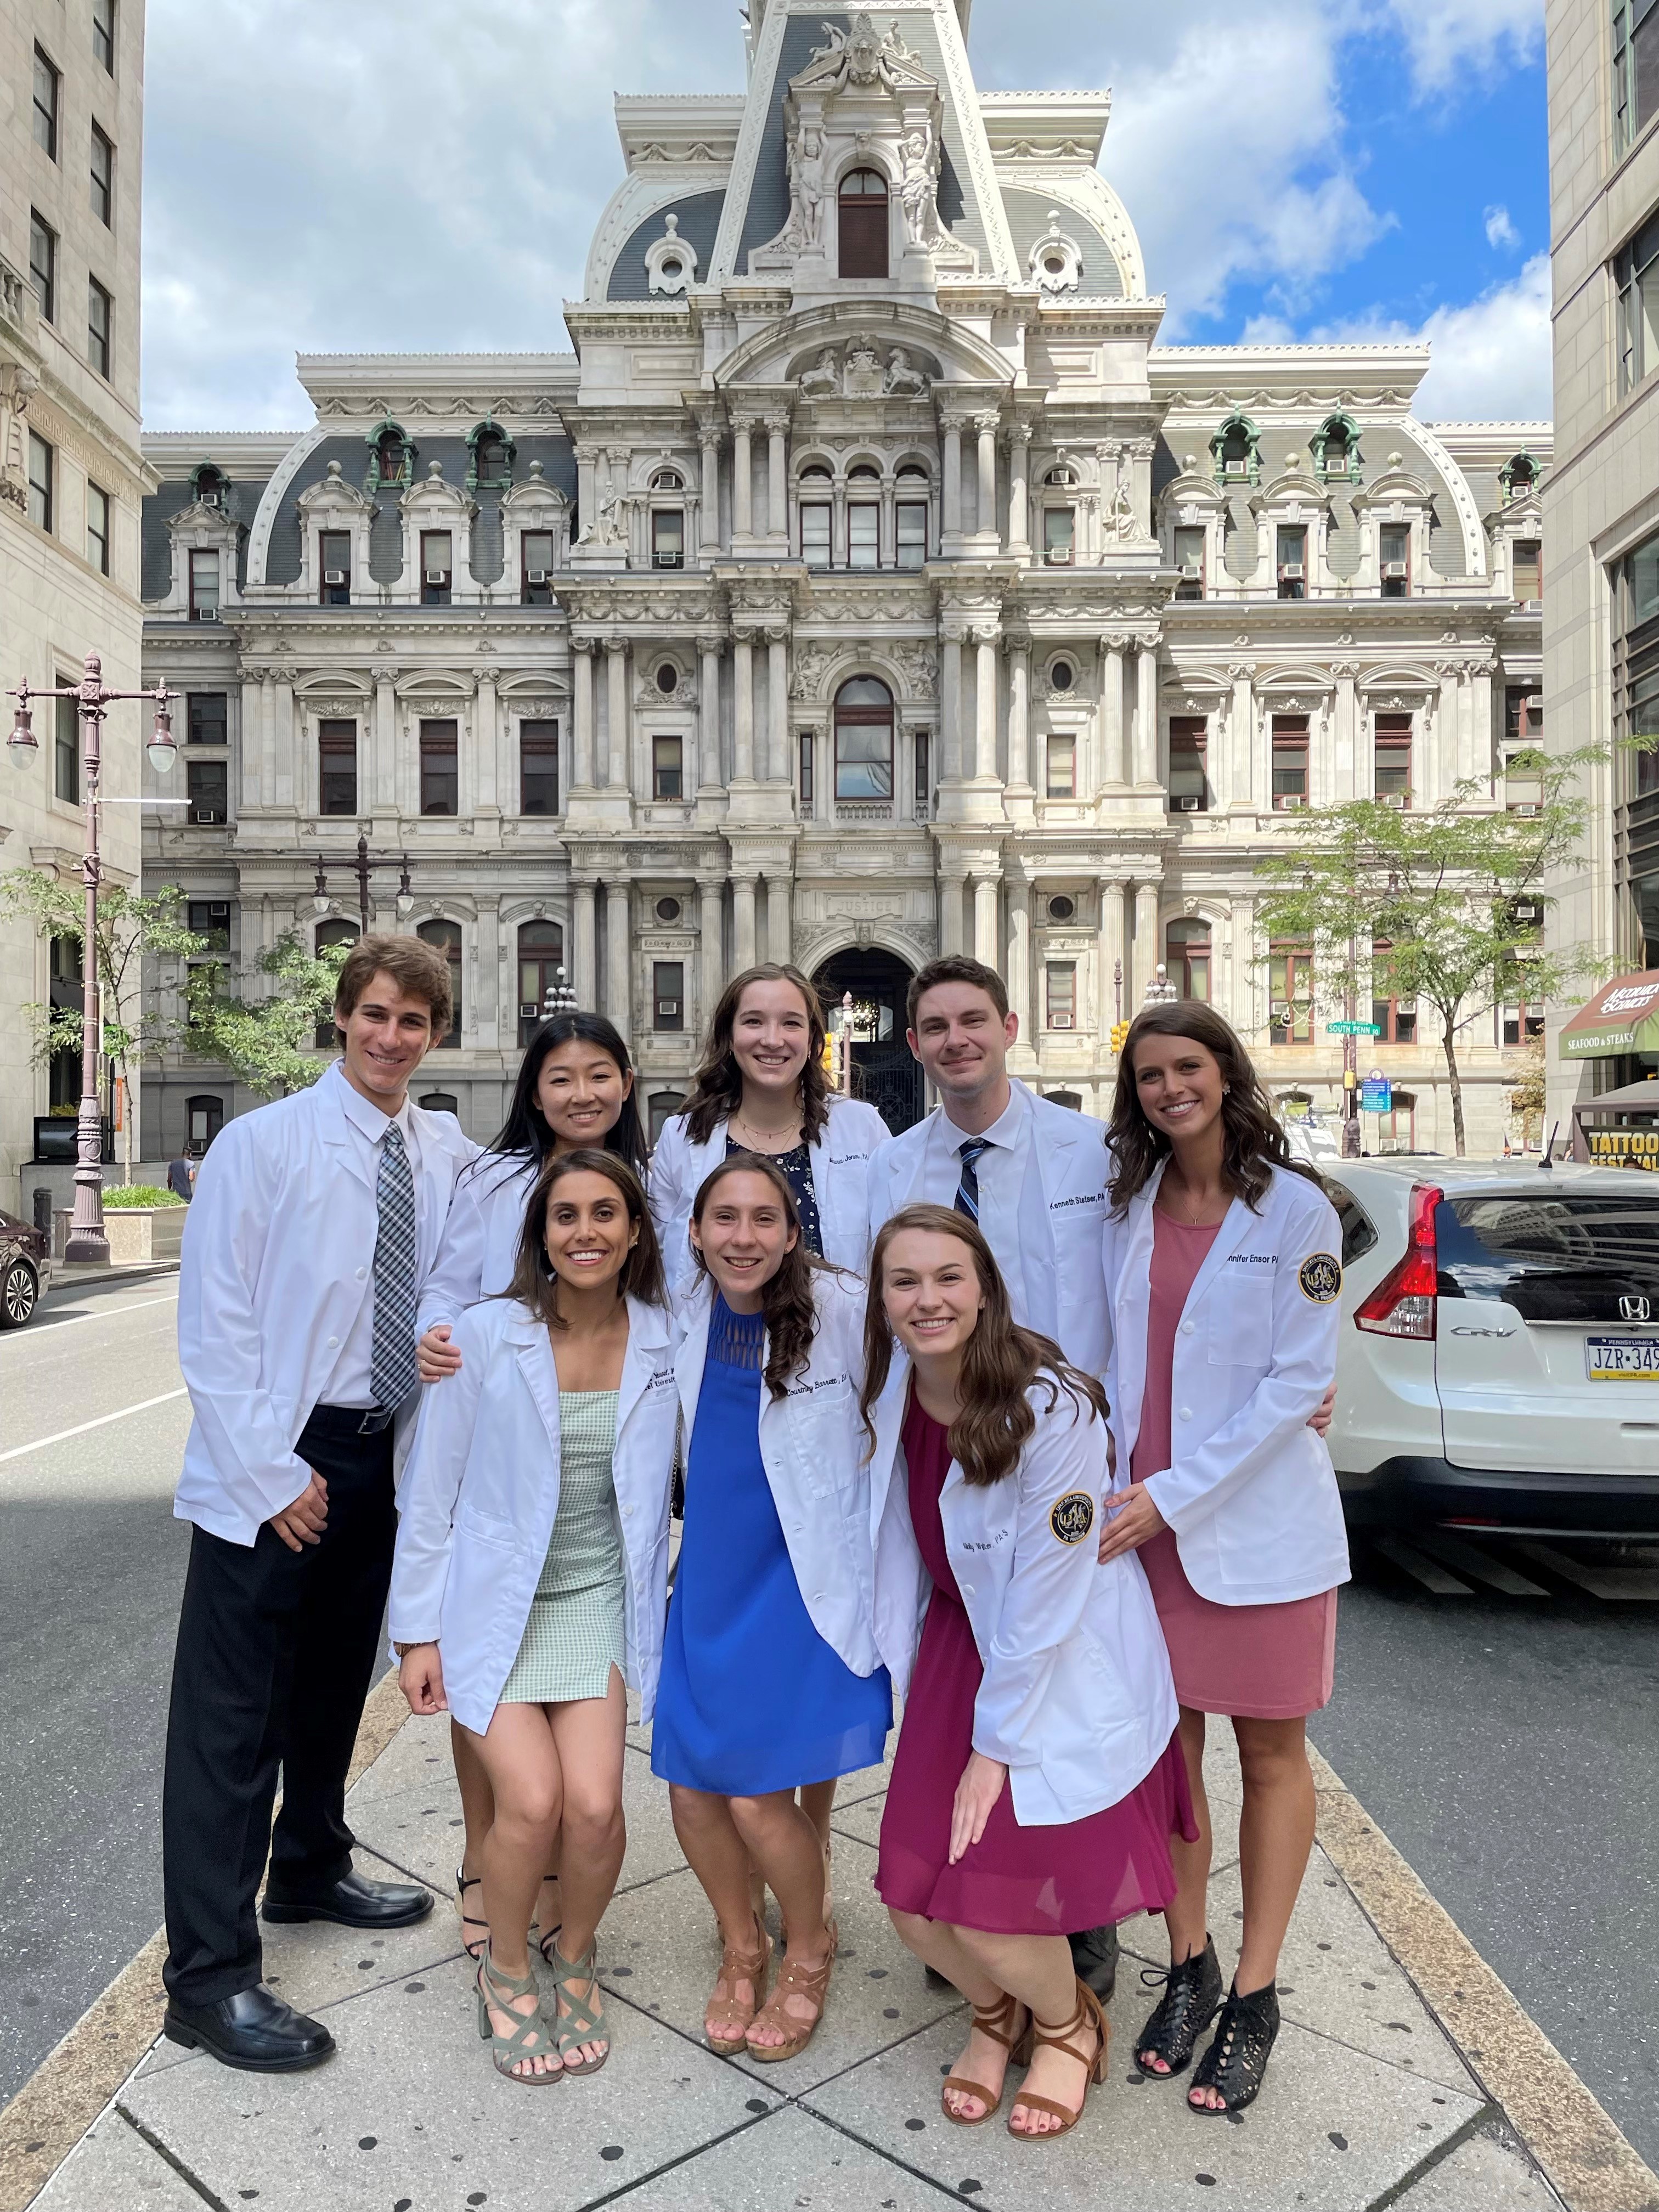 PA student Jen Ensor with fellow students with Philadelphia City Hall in the background